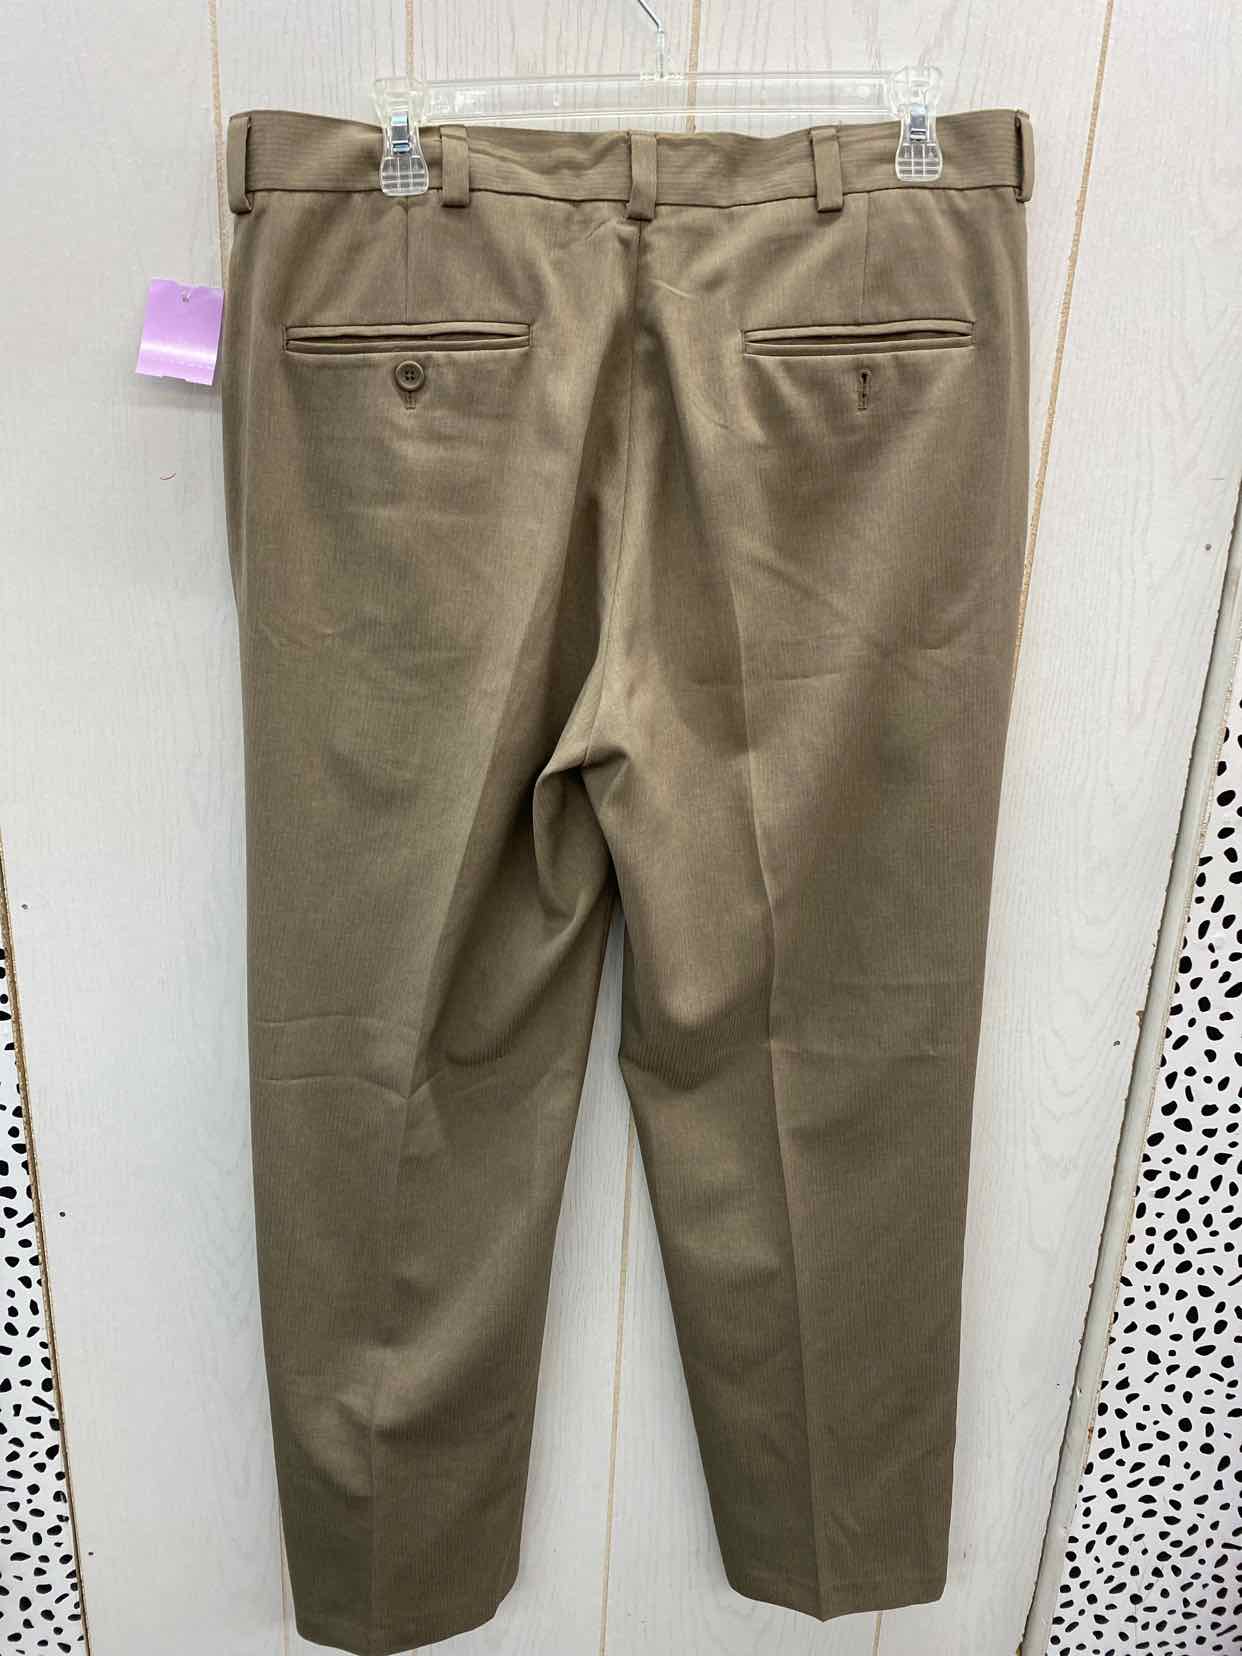 Kenneth Cole Size 34/30 Mens Pants